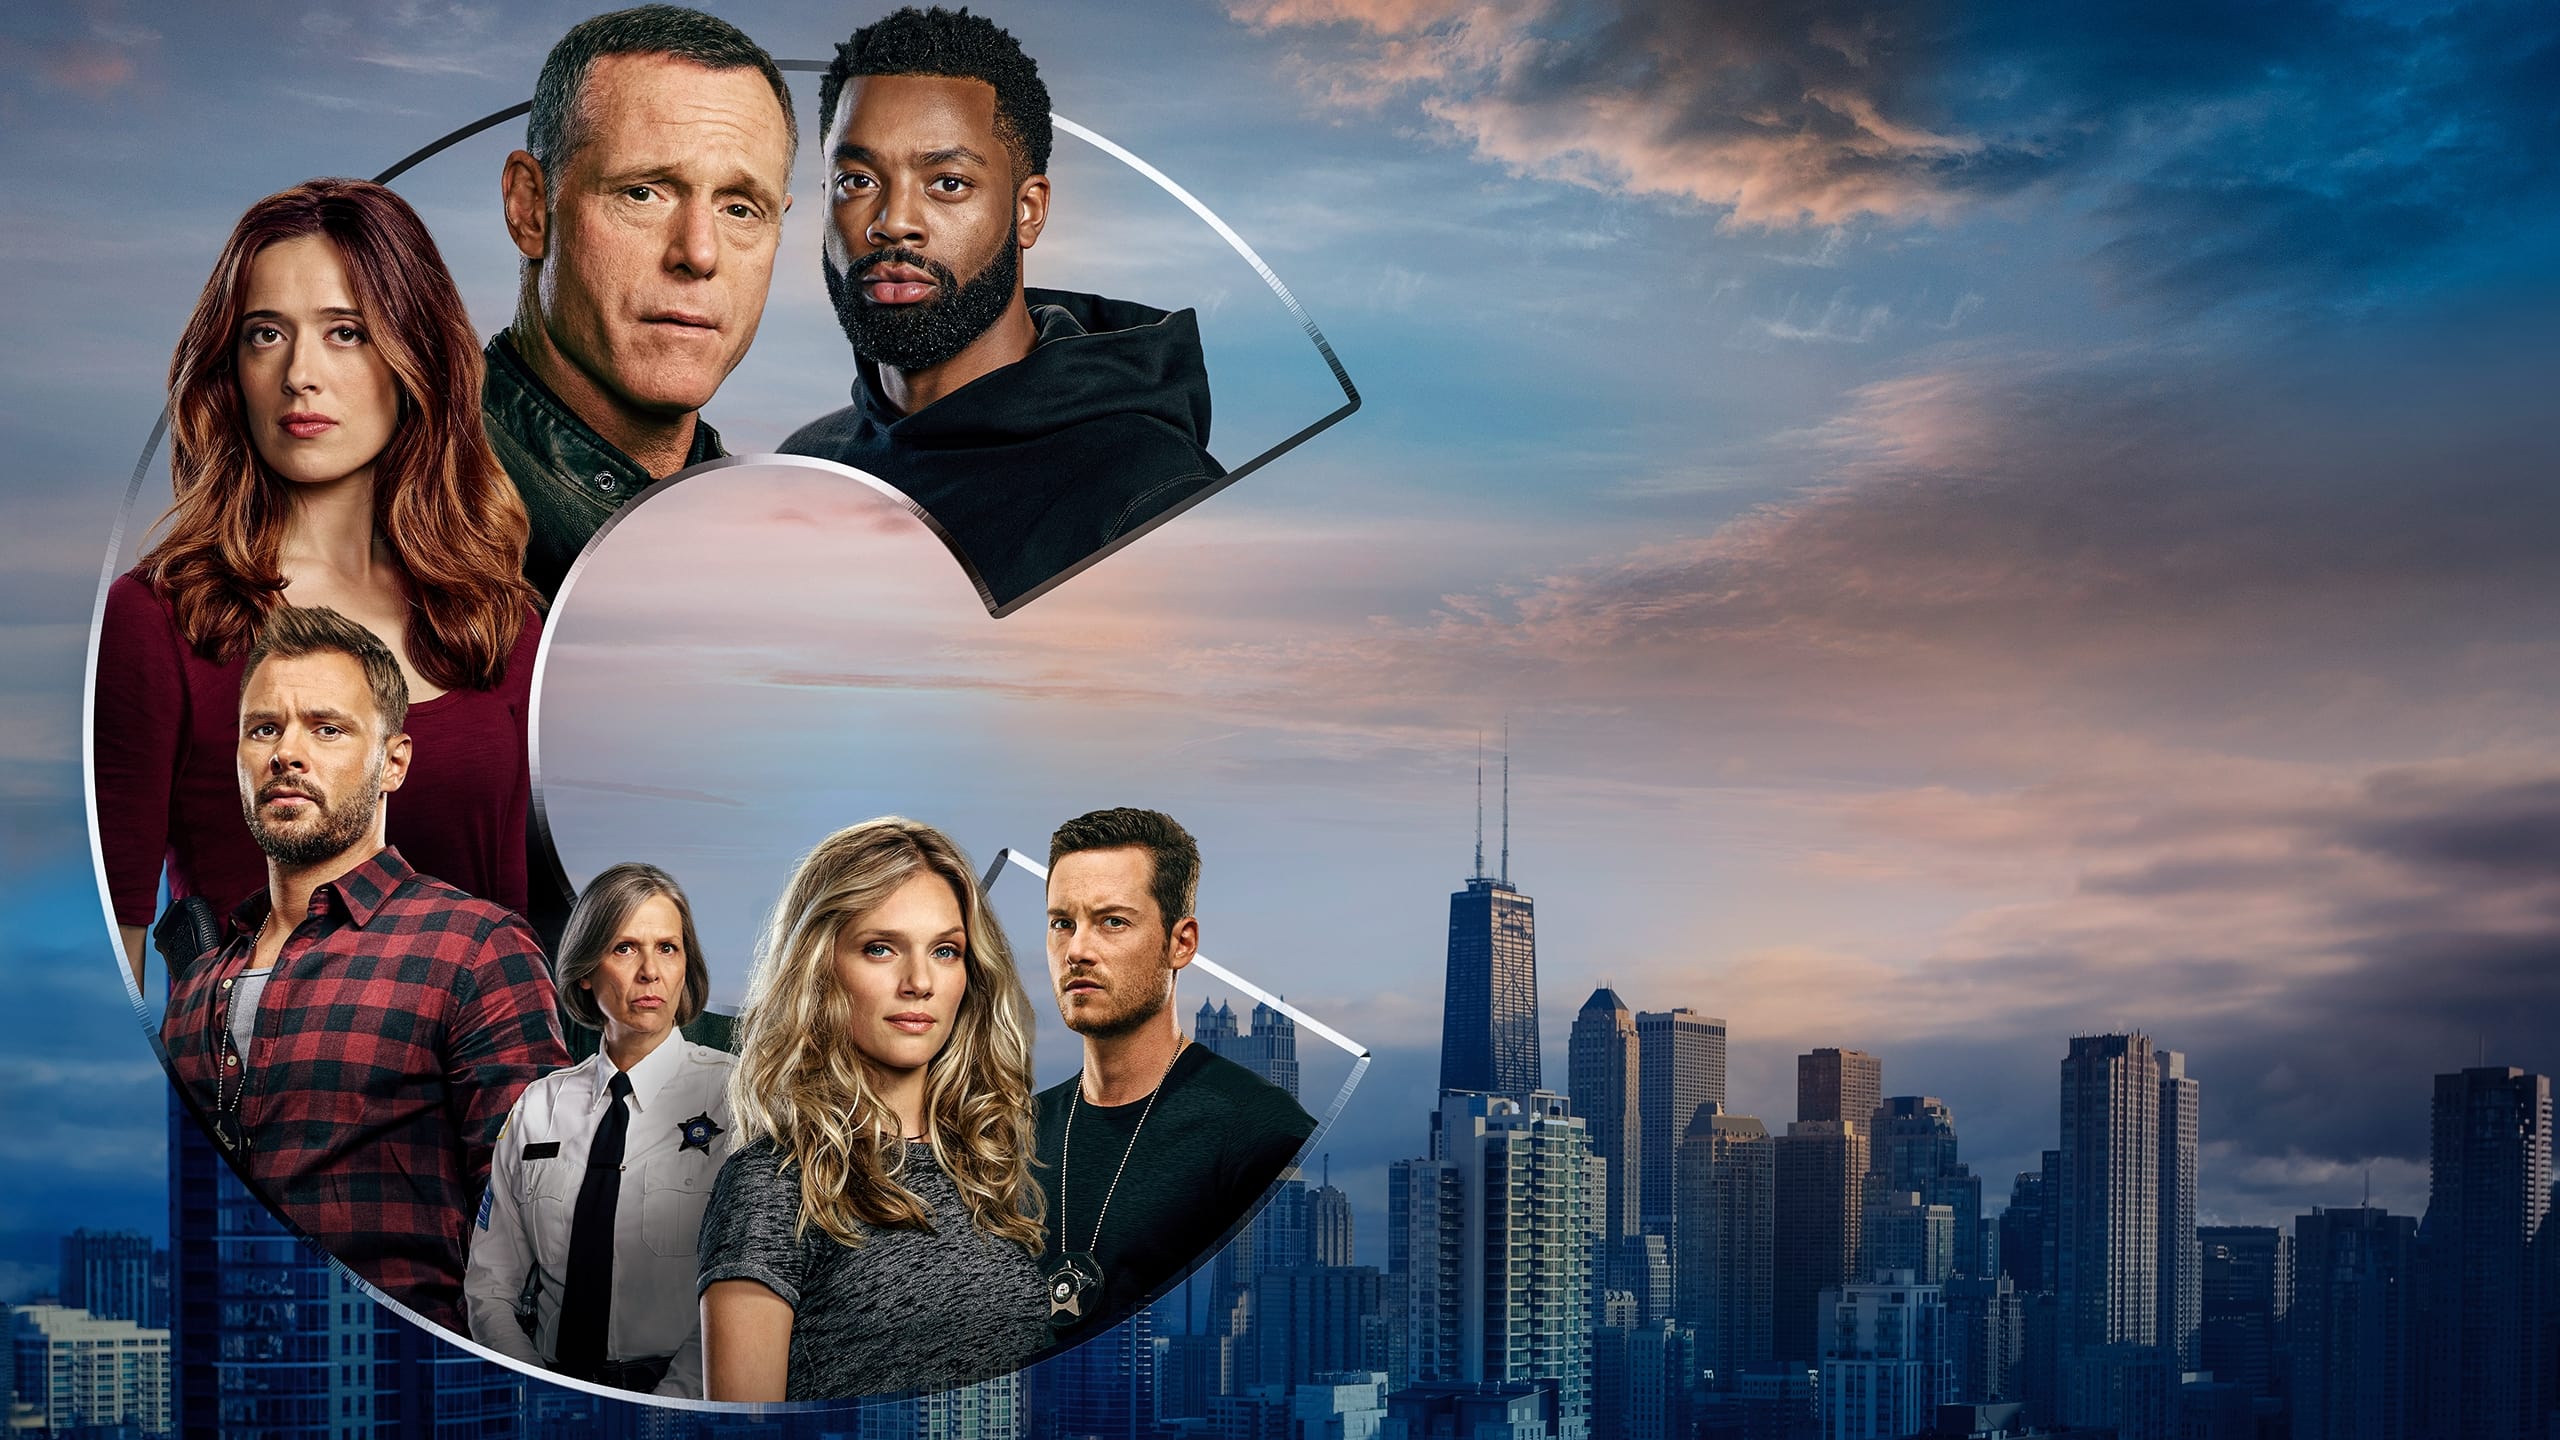 HD wallpaper TV Show Chicago PD Cast Police  Wallpaper Flare